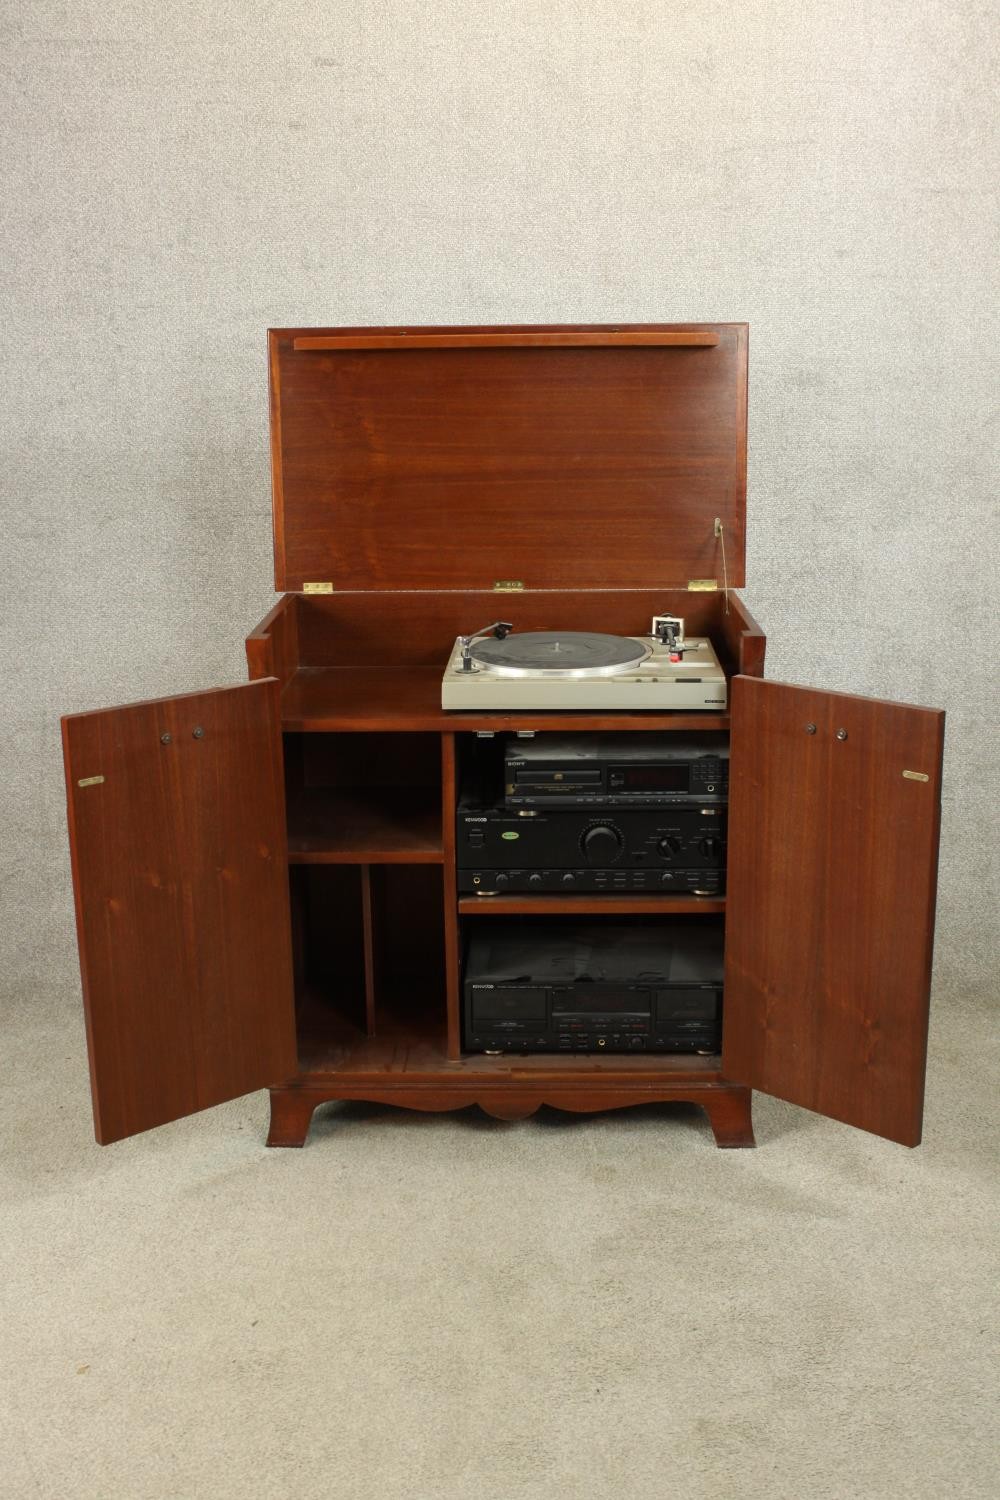 A contemporary Regency style twin door entertainment cabinet complete with with turntable, amp, - Image 3 of 6